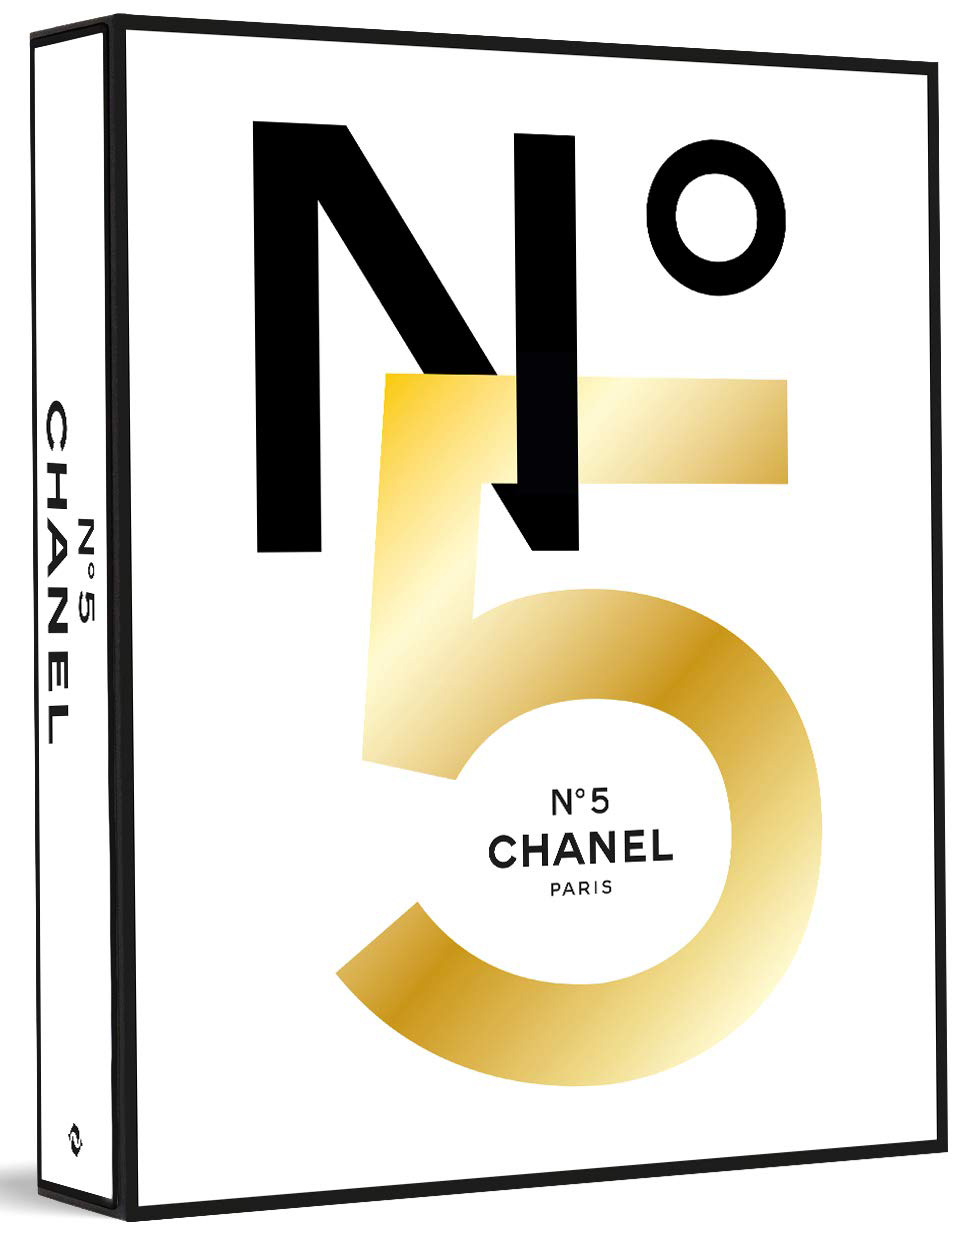 Chanel No. 5 The first book dedicated to the story of Chanel No. 5, the most famous parfume in the world. Arguably the most famous perfume in the world - most memorably endorsed by Marilyn Monroe - Chanel No 5 continues to fascinate and claims millions of devotees around the world. Created in 1921 by Coco Chanel, the perfume was one of the first to use synthetics. To complement her pioneering fashion, Chanel wanted to give the modern woman 'a perfume, but an artificial perfume...not rose or lily of the valley...a perfume that is compound', presented in a distinctively pared-back glass bottle that would become an icon in its own right (inspiring a series of works by Andy Warhol decades later). Presented in two volumes (one on the early years of Chanel No 5 from 1921 to 1945, the other on the period in which Chanel No. 5 went truly global, from the postwar years to today), Chanel No 5 explores the evolution of the perfume's packaging, composition, manufacture and marketing, with unprecedented access to the Chanel archives and those tasked with creating the fragrance today. The world's leading creatives have lent their talents to the perfume's advertising campaigns, which are given pride of place in the book, from photographers such as Richard Avedon and Helmut Newton, to film directors including Ridley Scott and Baz Luhrmann, and stylish muses - Coco Chanel herself, of course, as well as Suzy Parker, Catherine Deneuve, Nicole Kidman, Gisele Bundchen and Lily-Rose Depp. With over 750 illustrations Taal: Engels Bindwijze: Hardcover Afmetingen: 33 x 27 cm Aantal pagina's: 426 pagina's Auteur: Pauline Dreyfus Uitgever Thames & Hudson Ltd